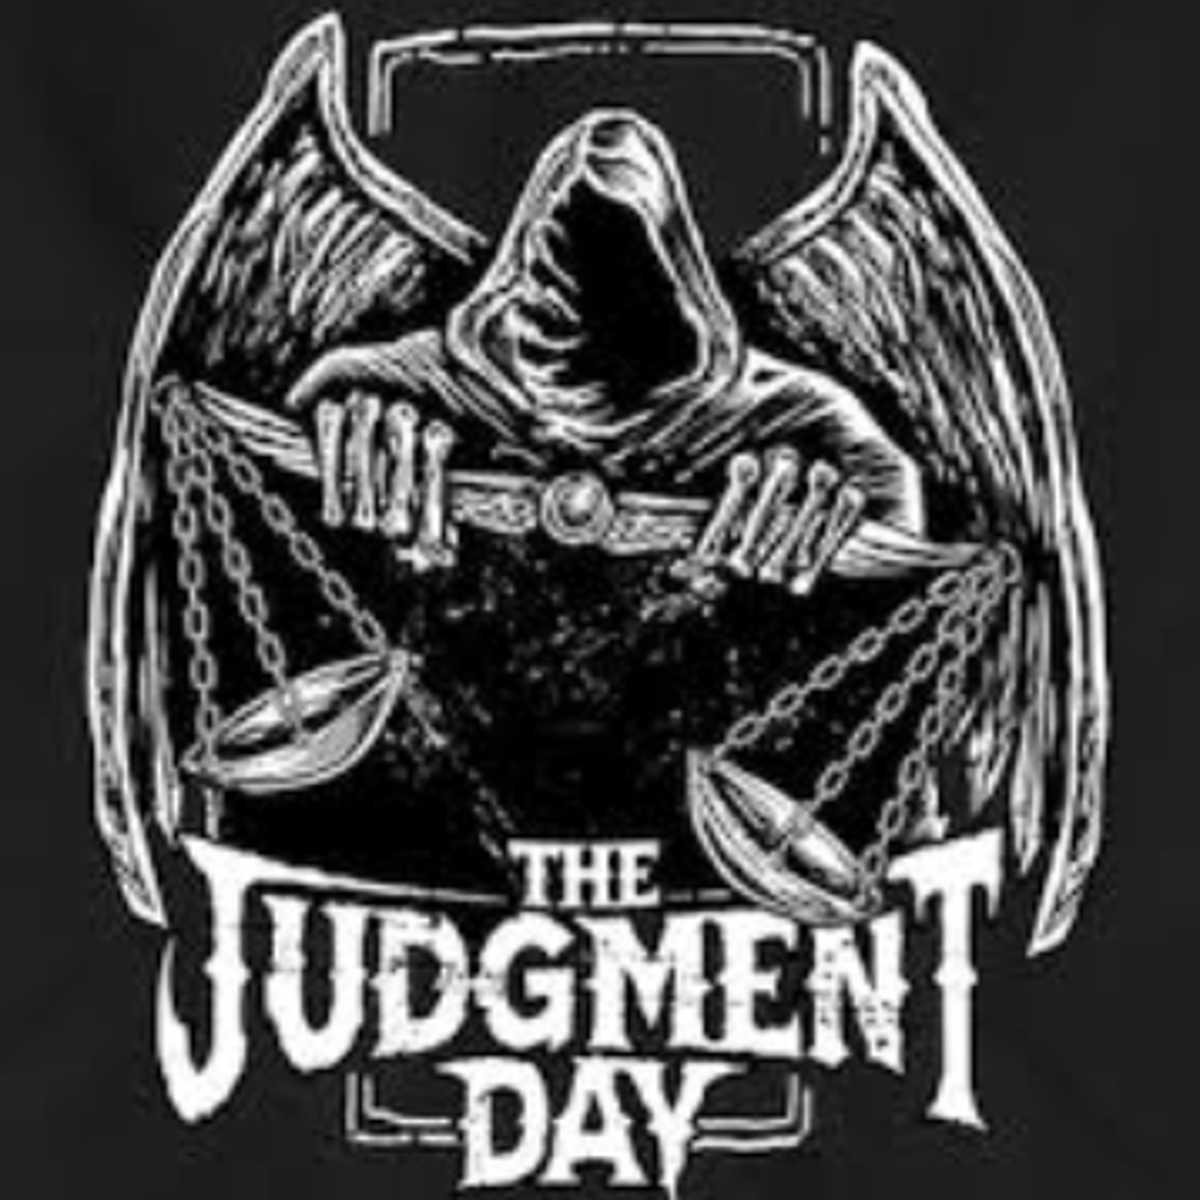 The Judgement Day